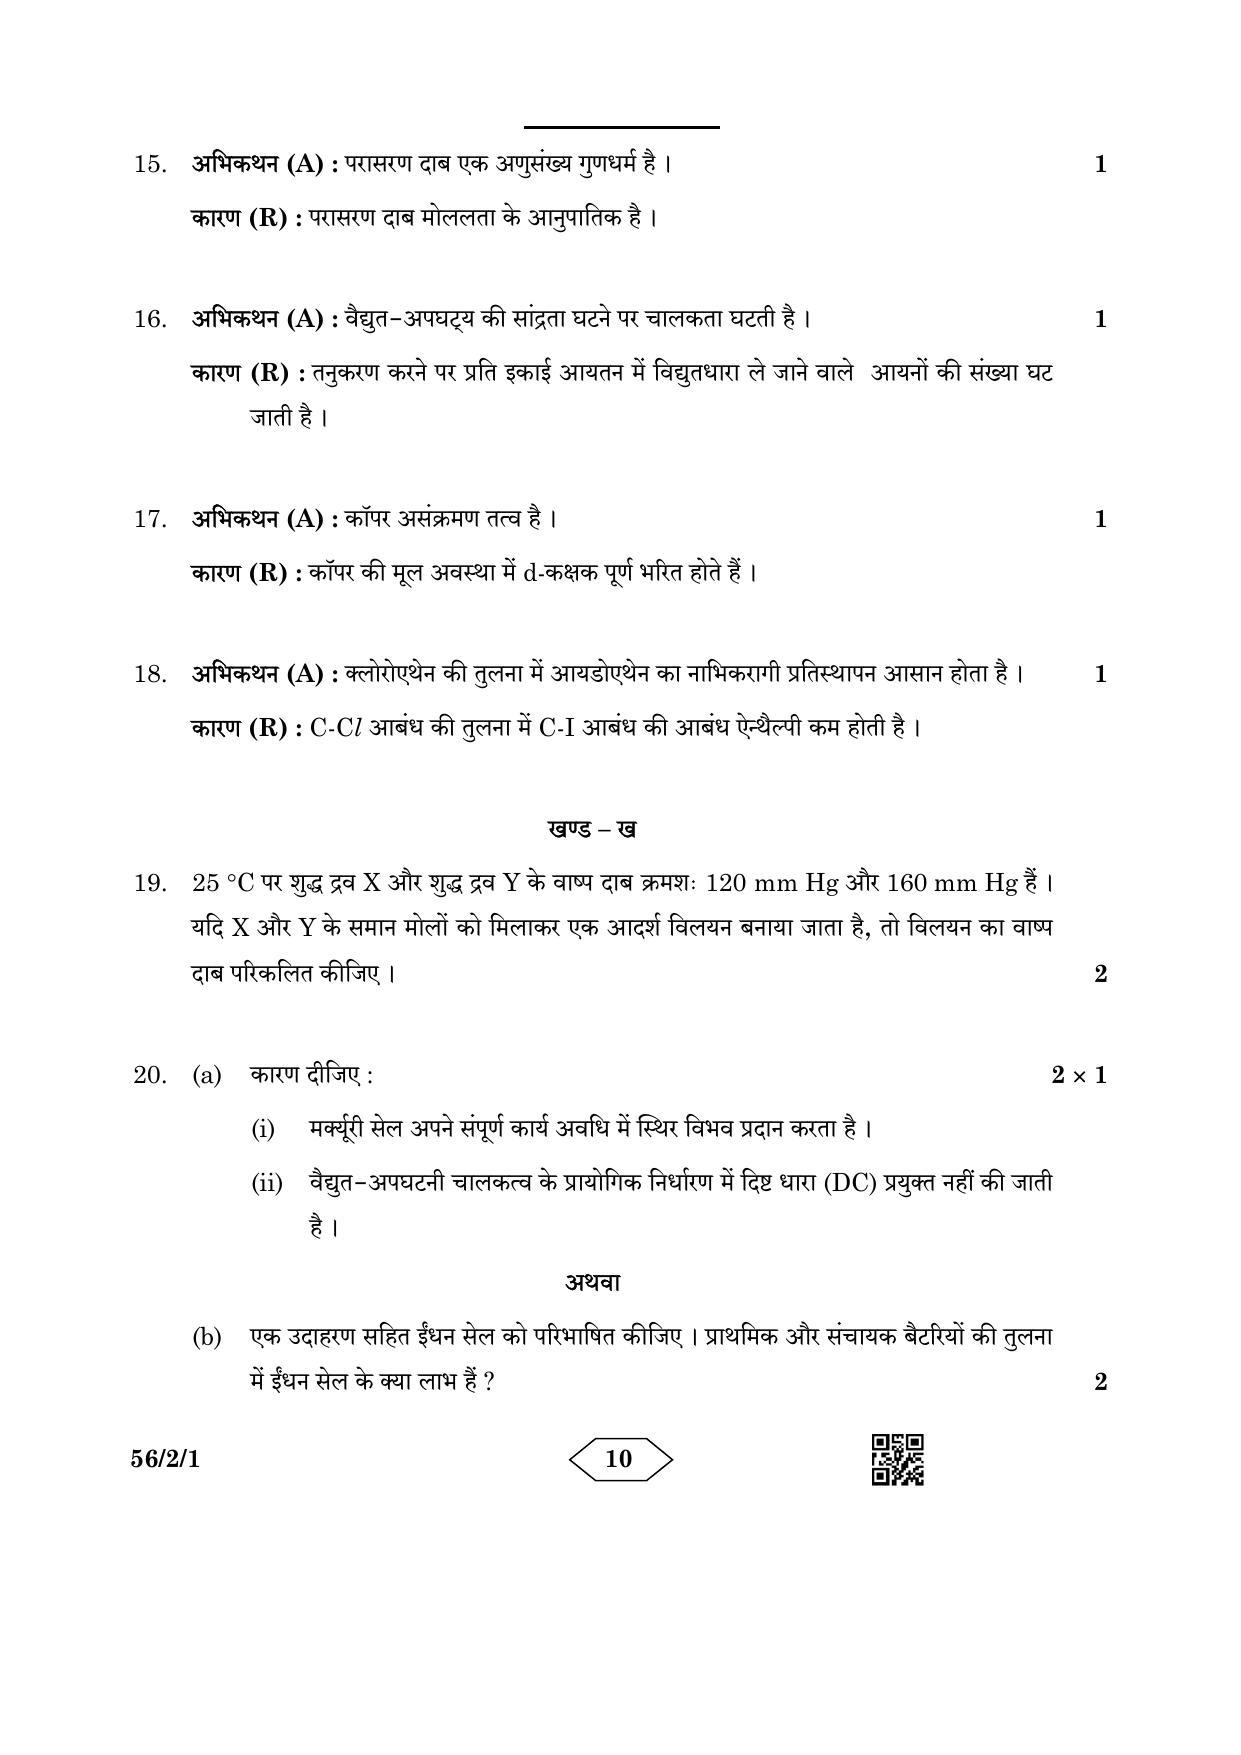 CBSE Class 12 56-2-1 Chemistry 2023 Question Paper - Page 10